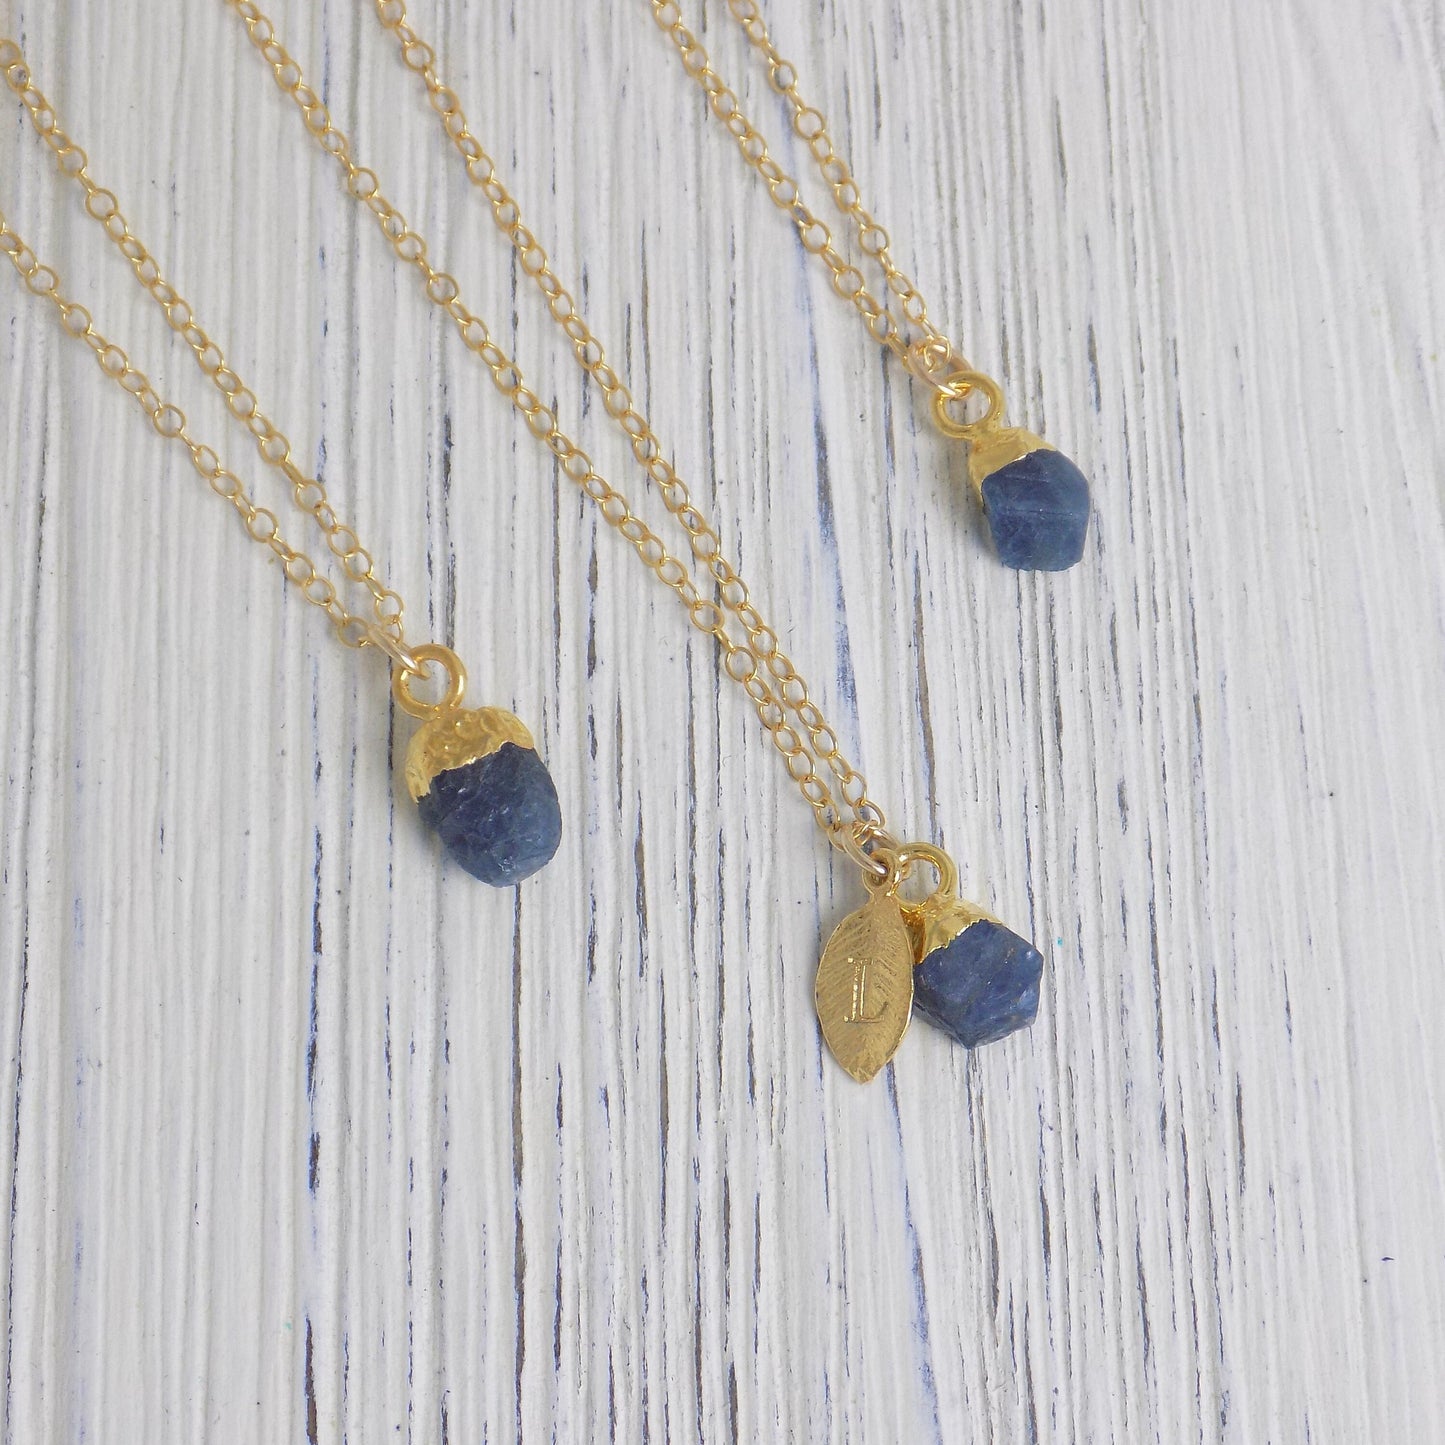 Tiny Sapphire Necklace Gold, Personalized Raw Sapphire Pendant, Navy Blue Crystals, September Borthday Gift For Best Friend, M5-610